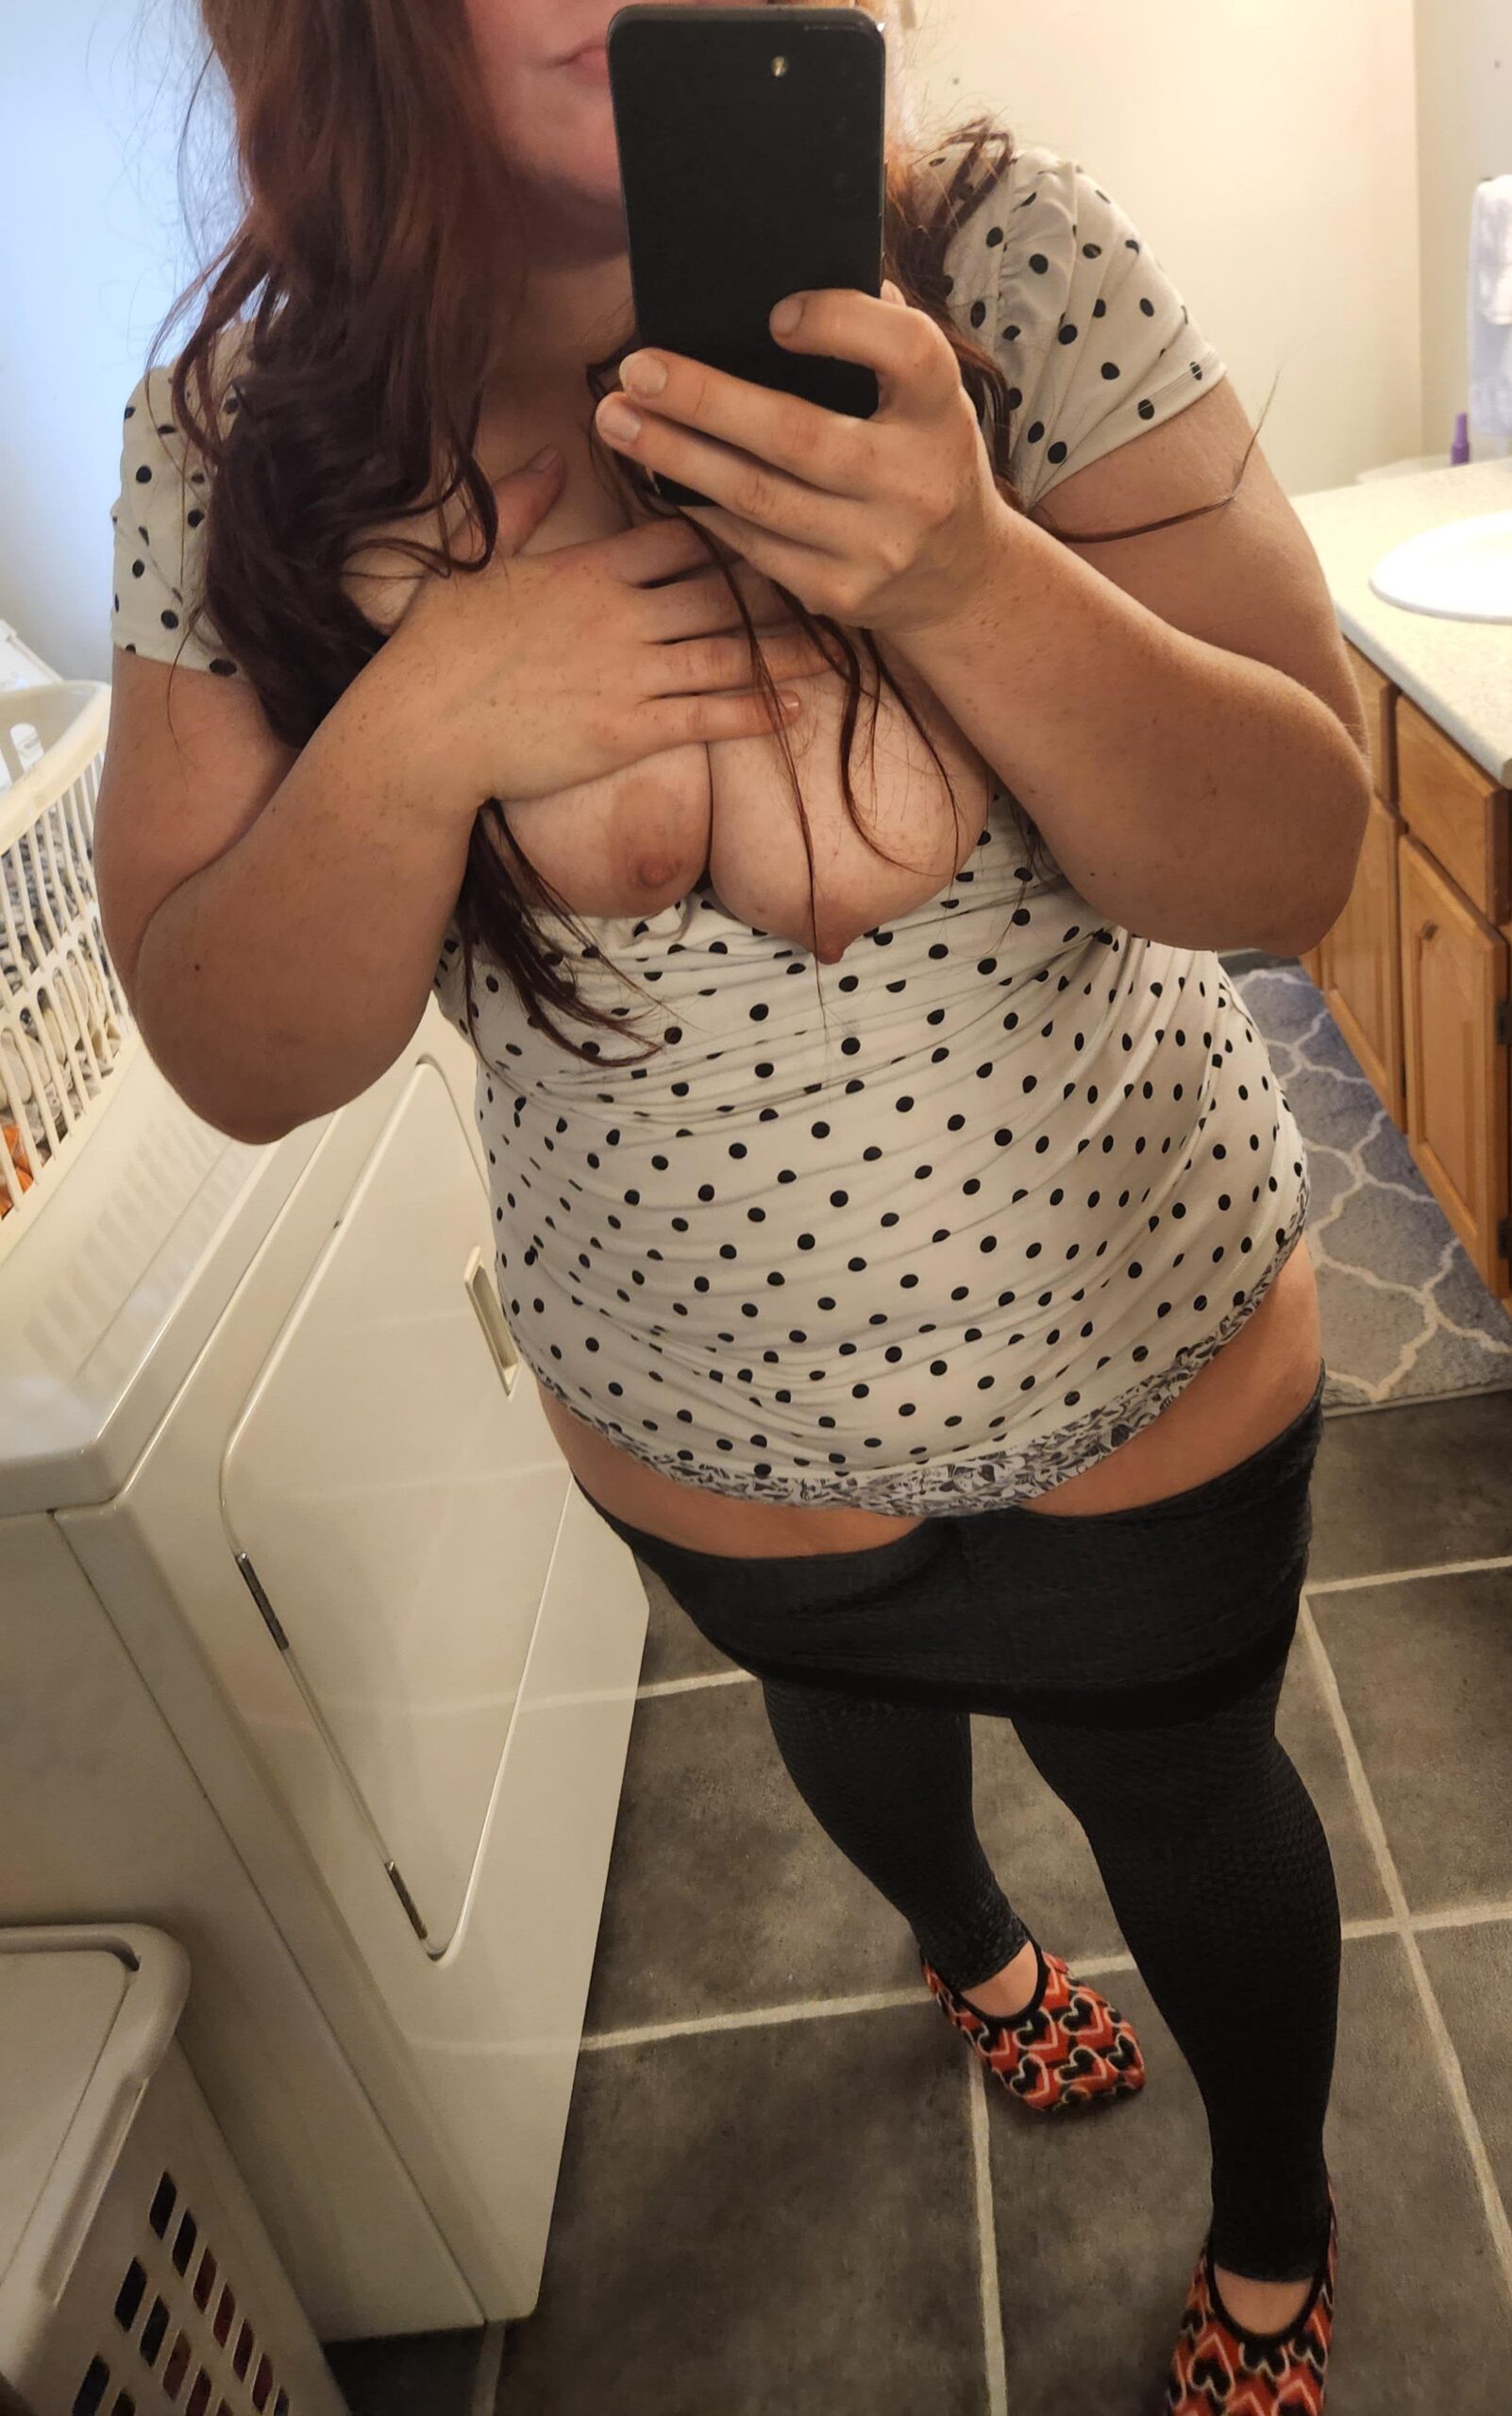 BBW boobs -  some Friday curves for your viewing pleasure 😚